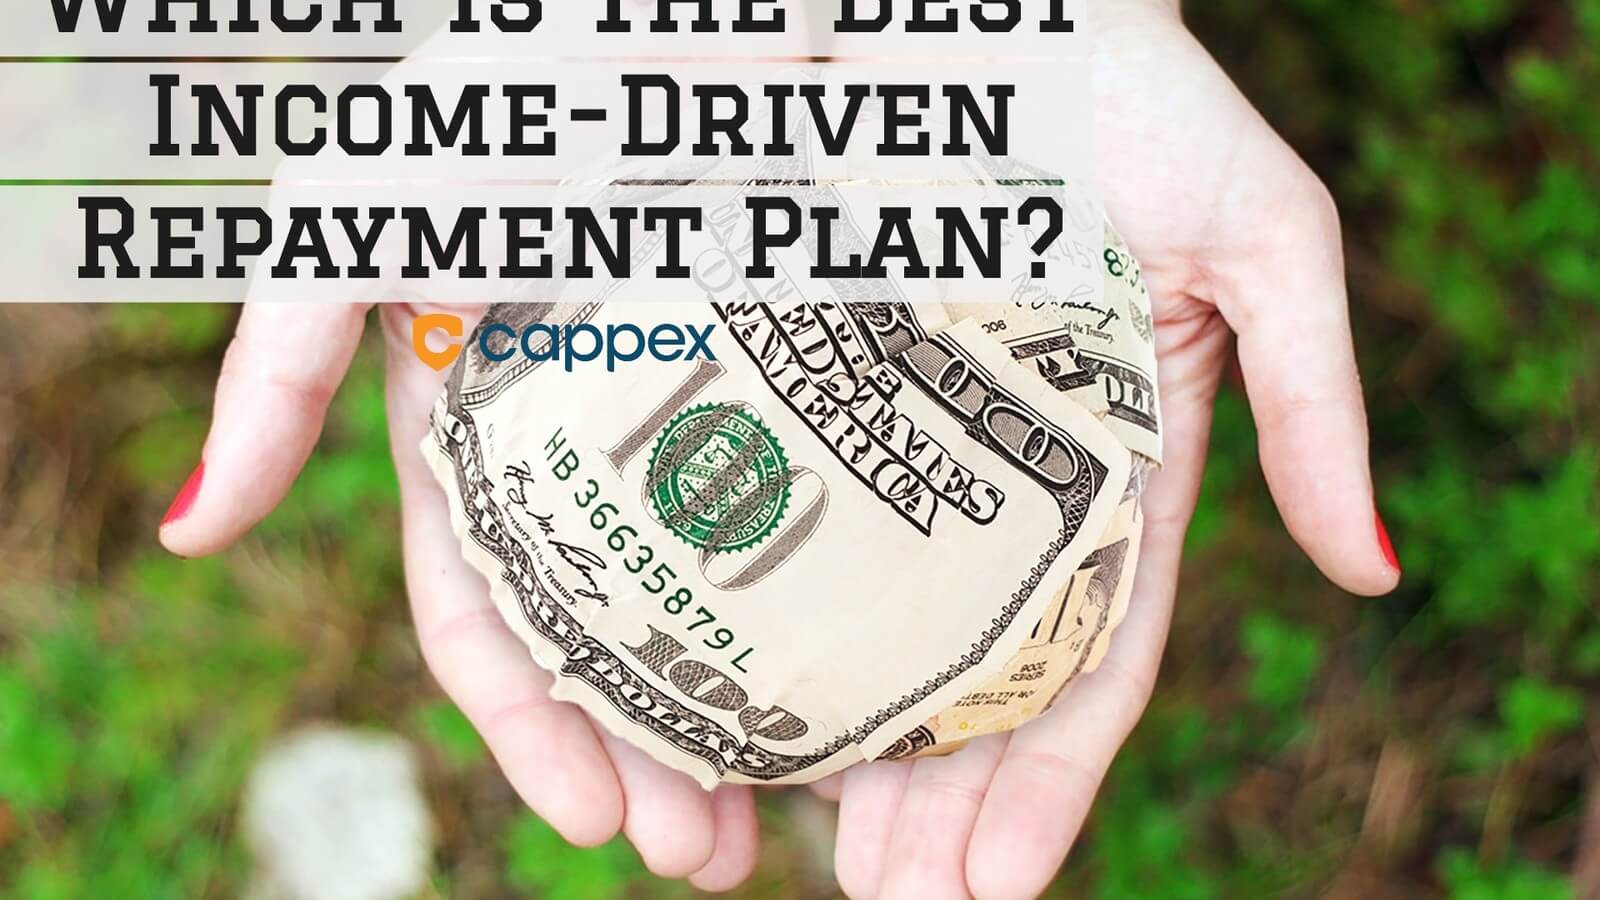 Which is the Best Income-Driven Repayment Plan